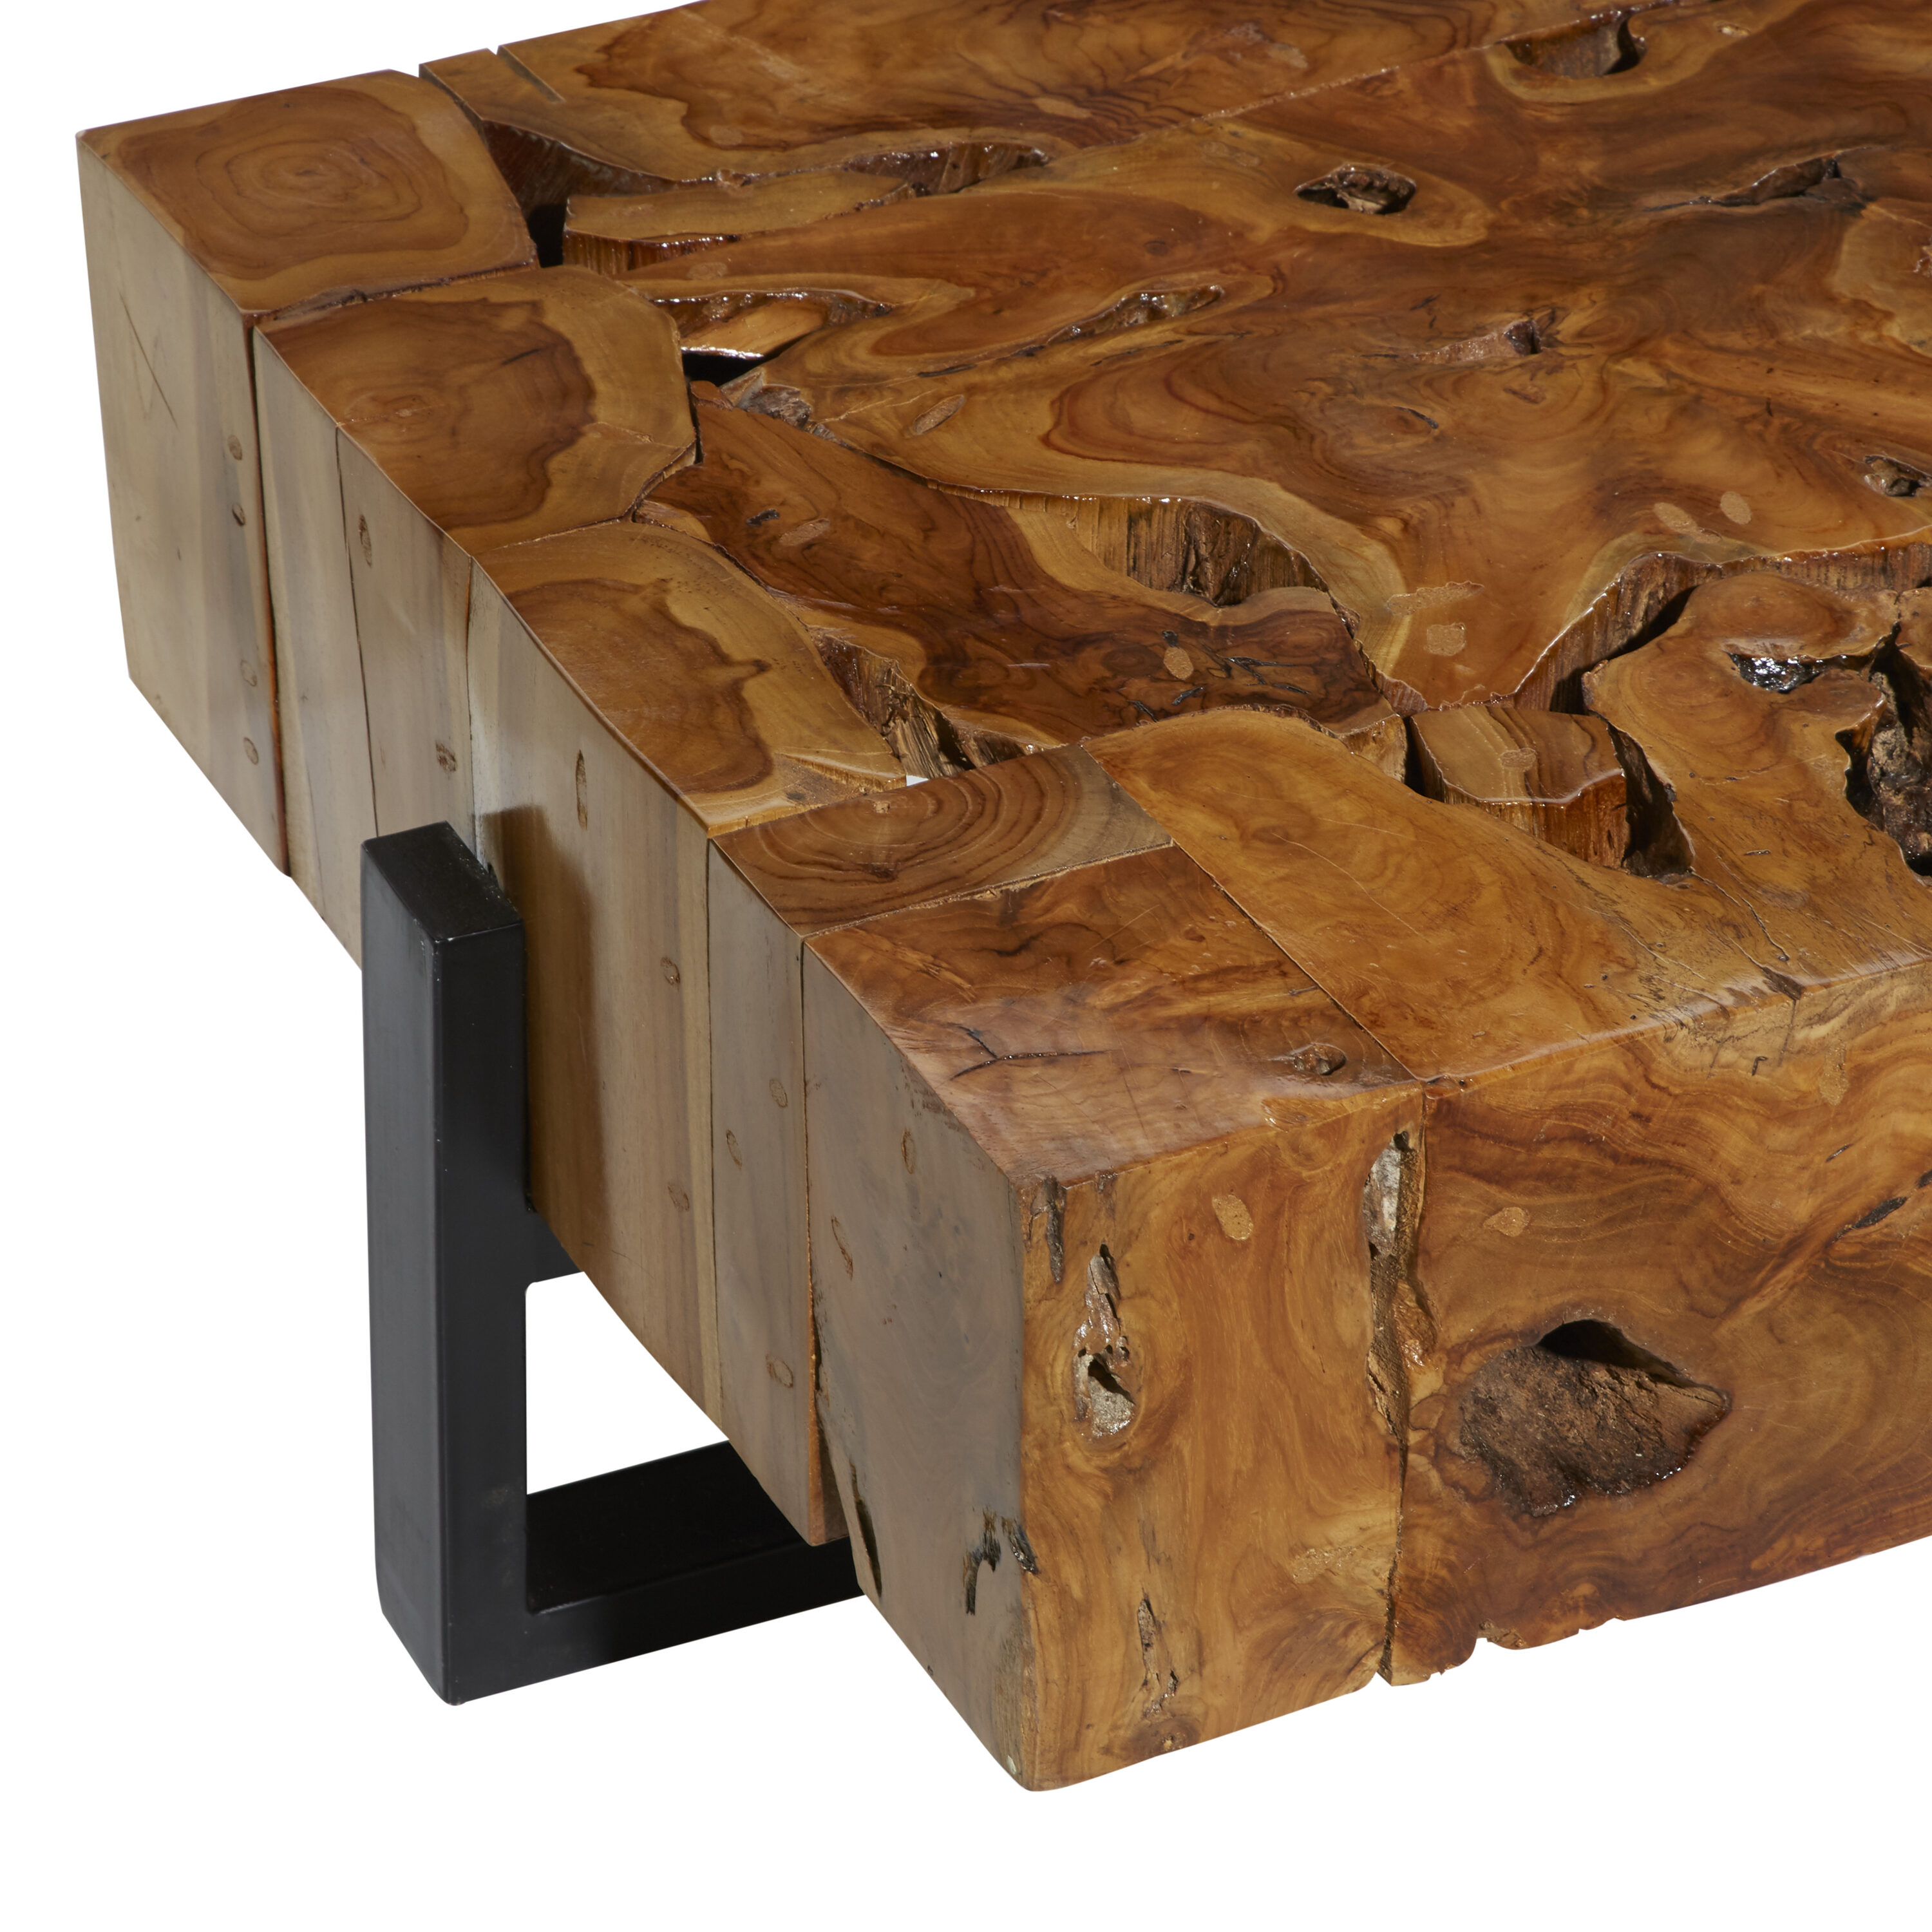 Grayson Lane Pine Wood Rustic Coffee Table in the Coffee Tables